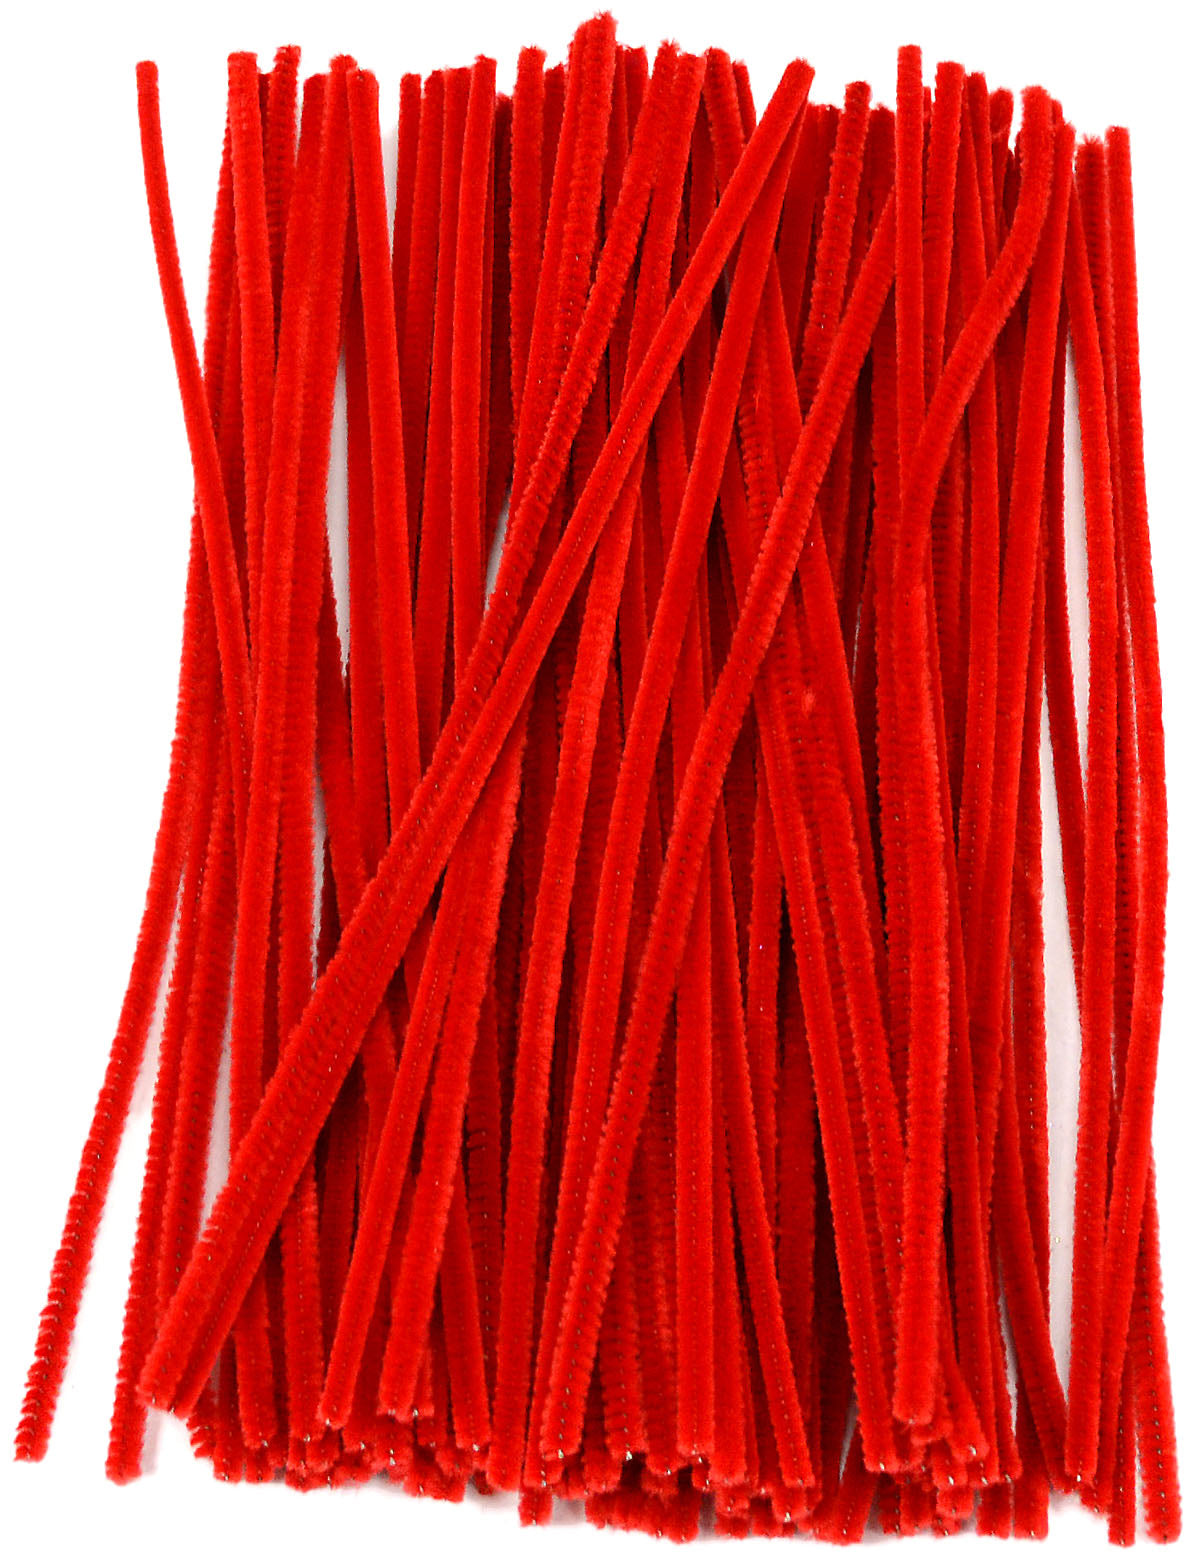 12" Pipe Cleaner Stems: 6mm Chenille Red (100)